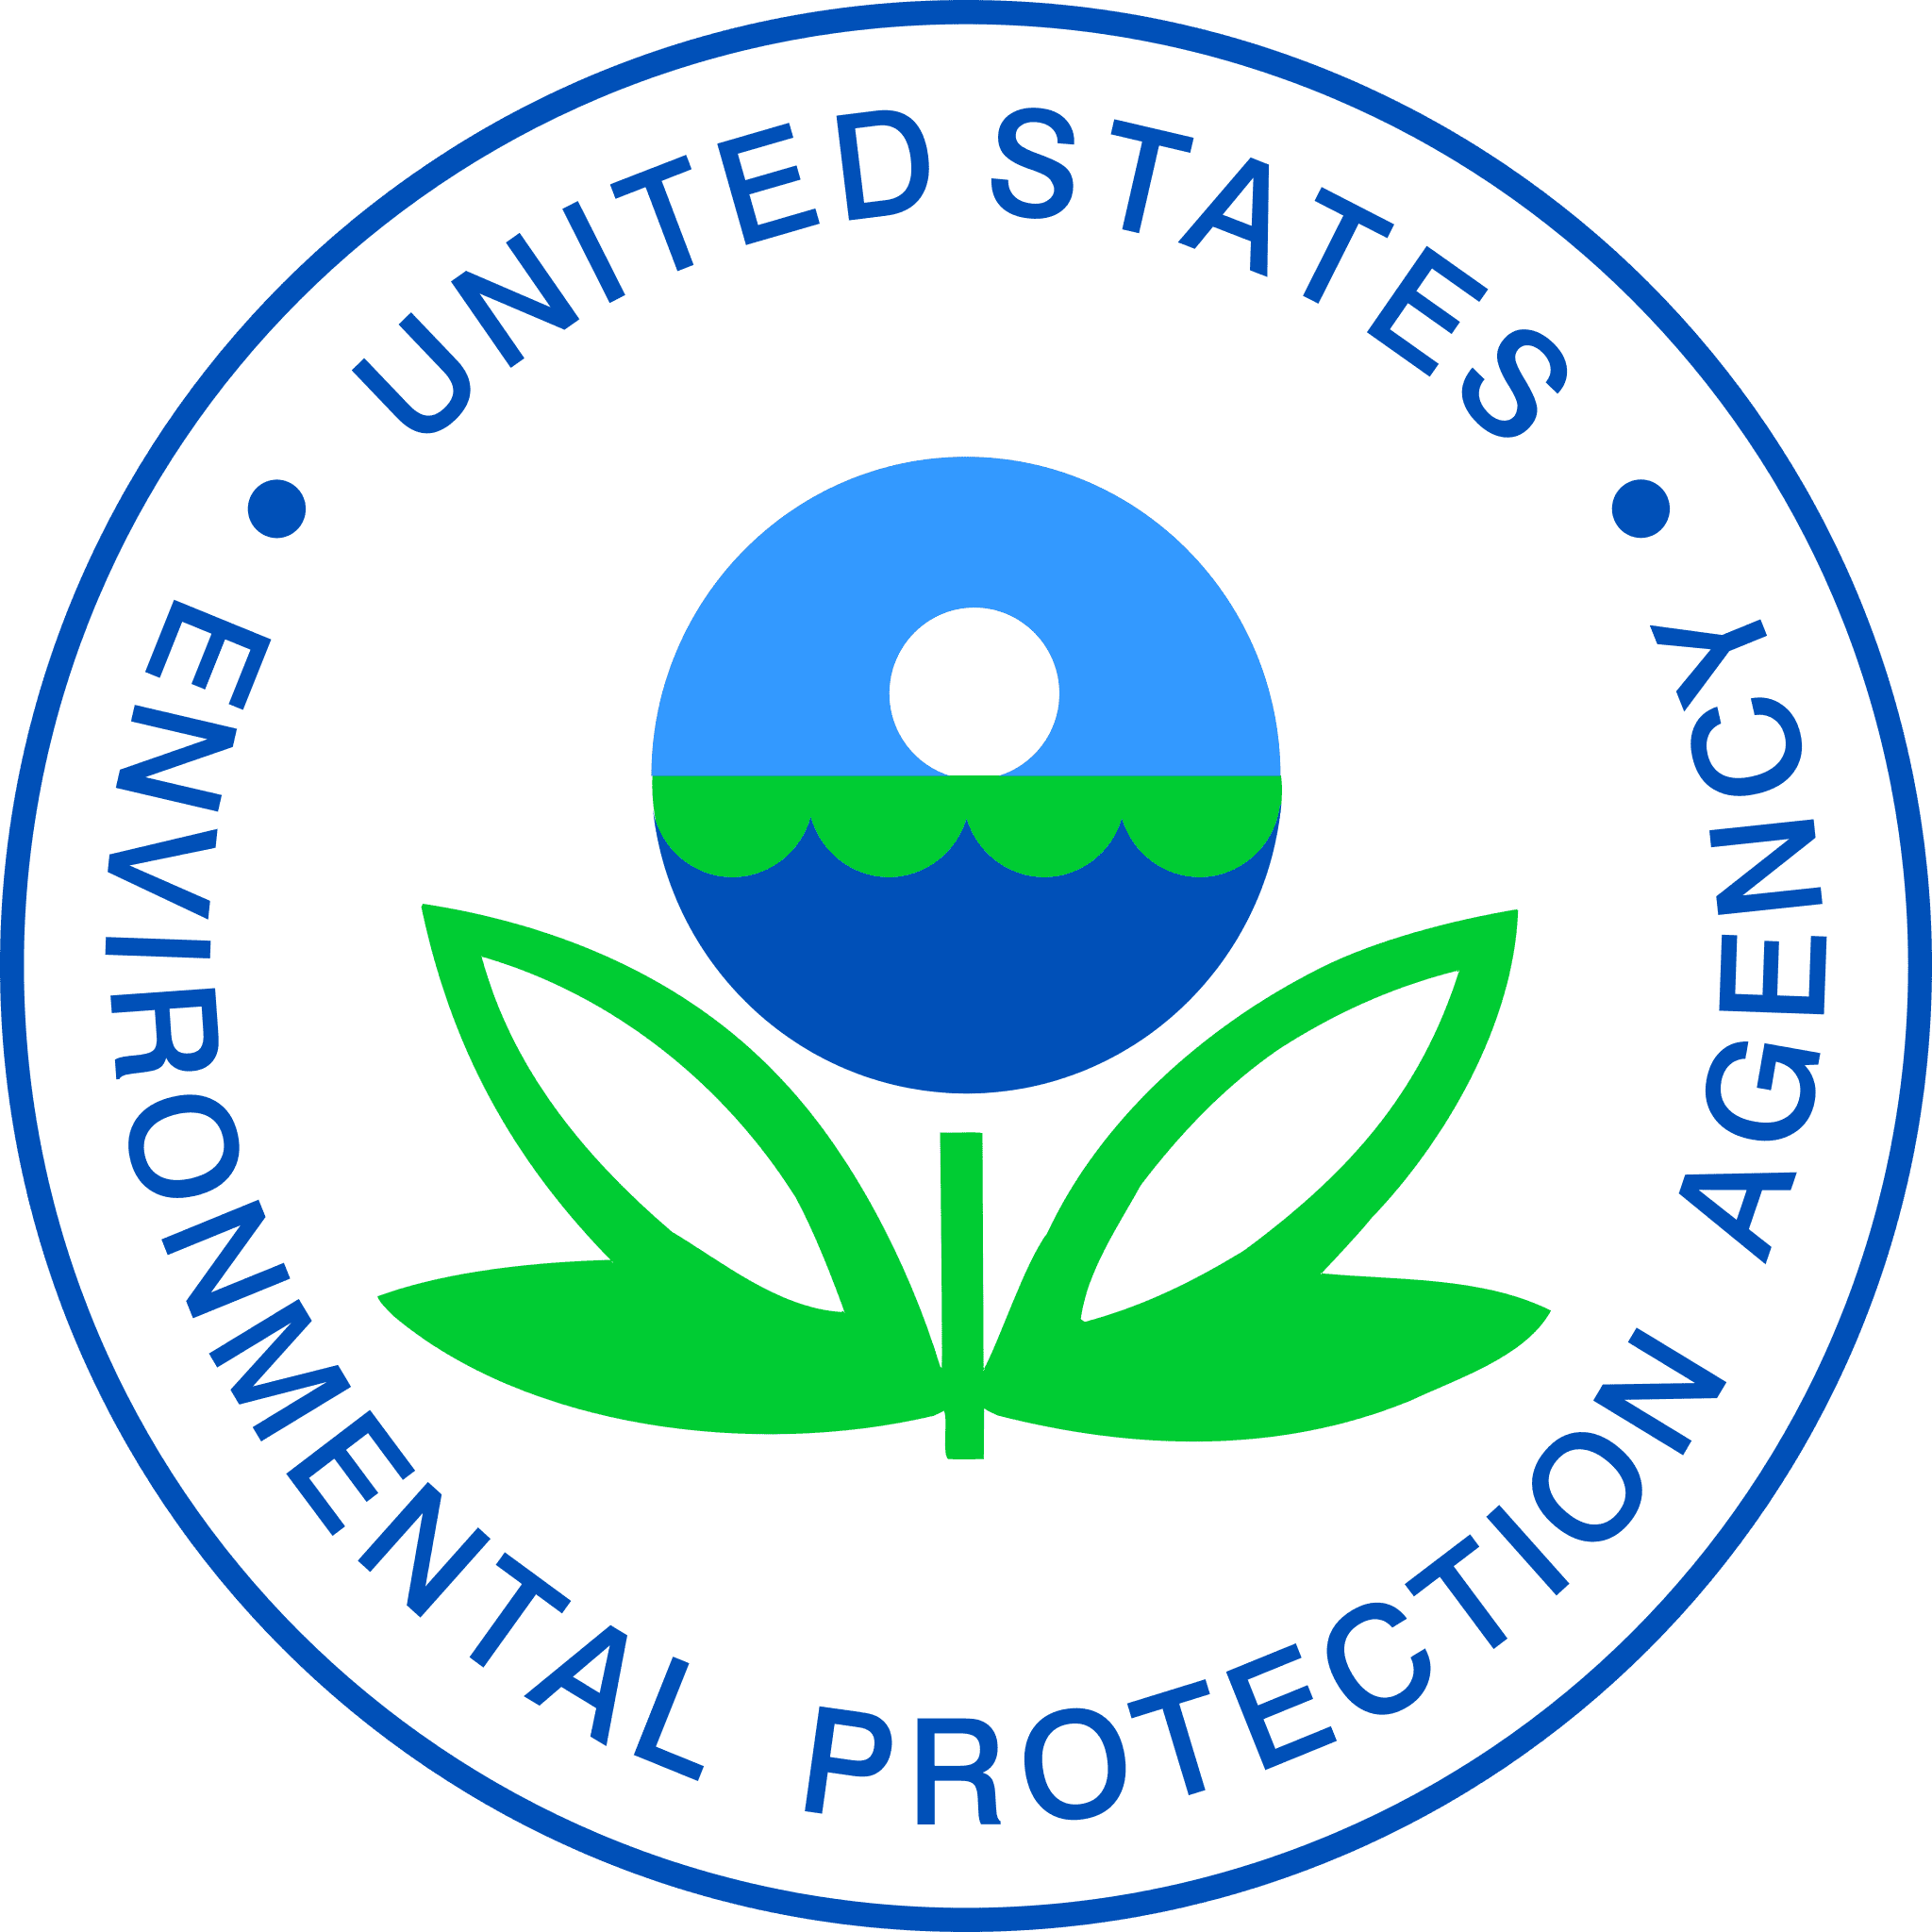 Seal logo for the United States Enivironmental Protection Agency